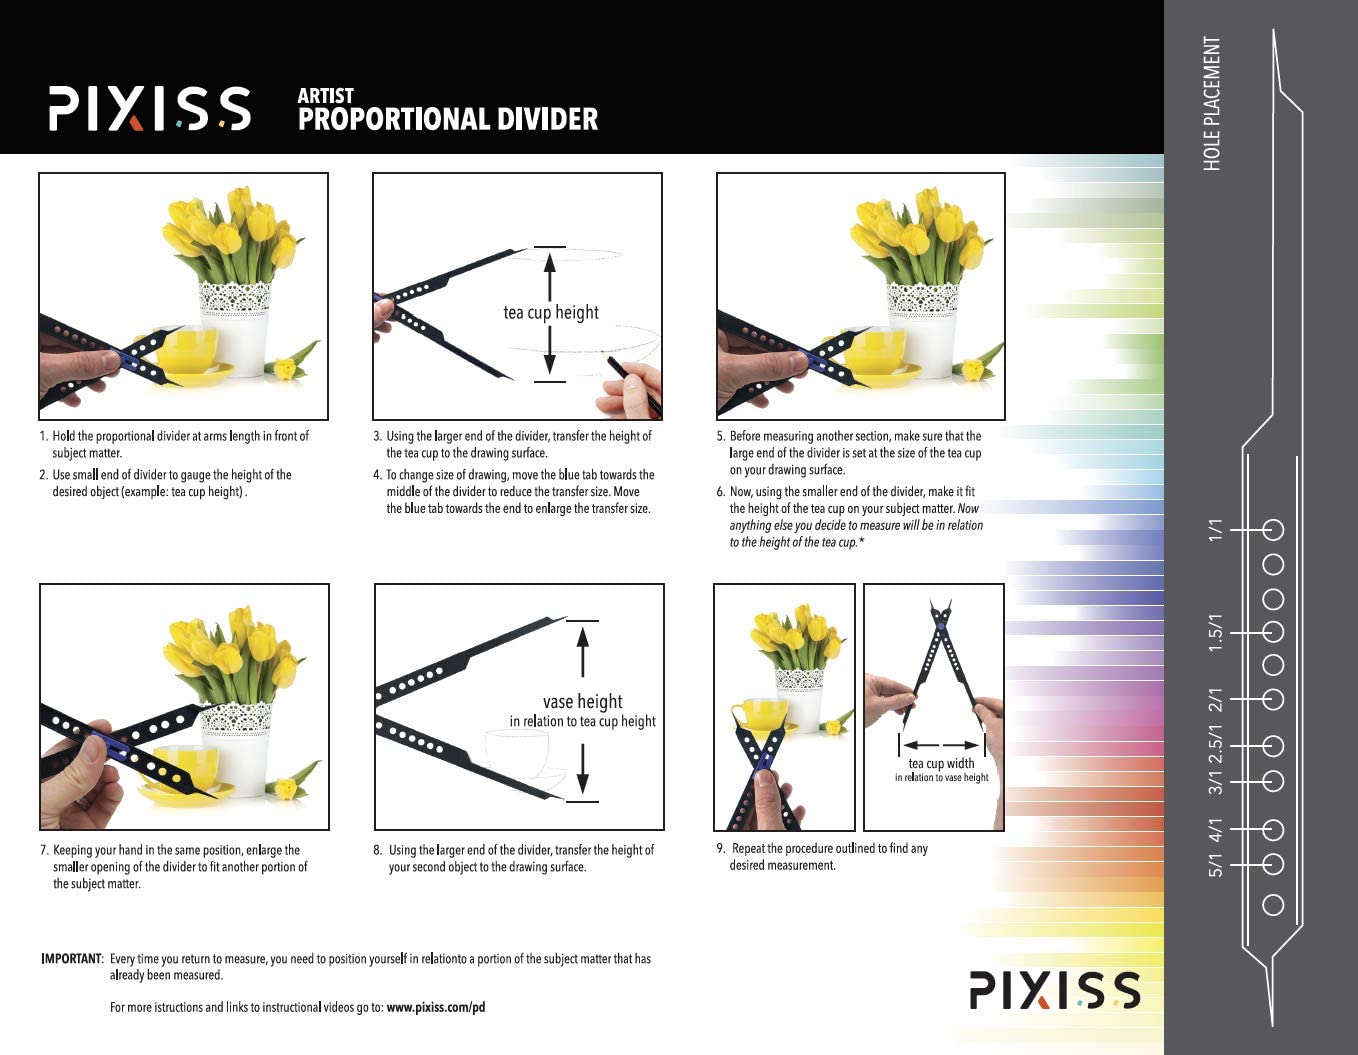 Pixiss Proportional Divider Artist Drawing Tool for Artists, Professional Caliper